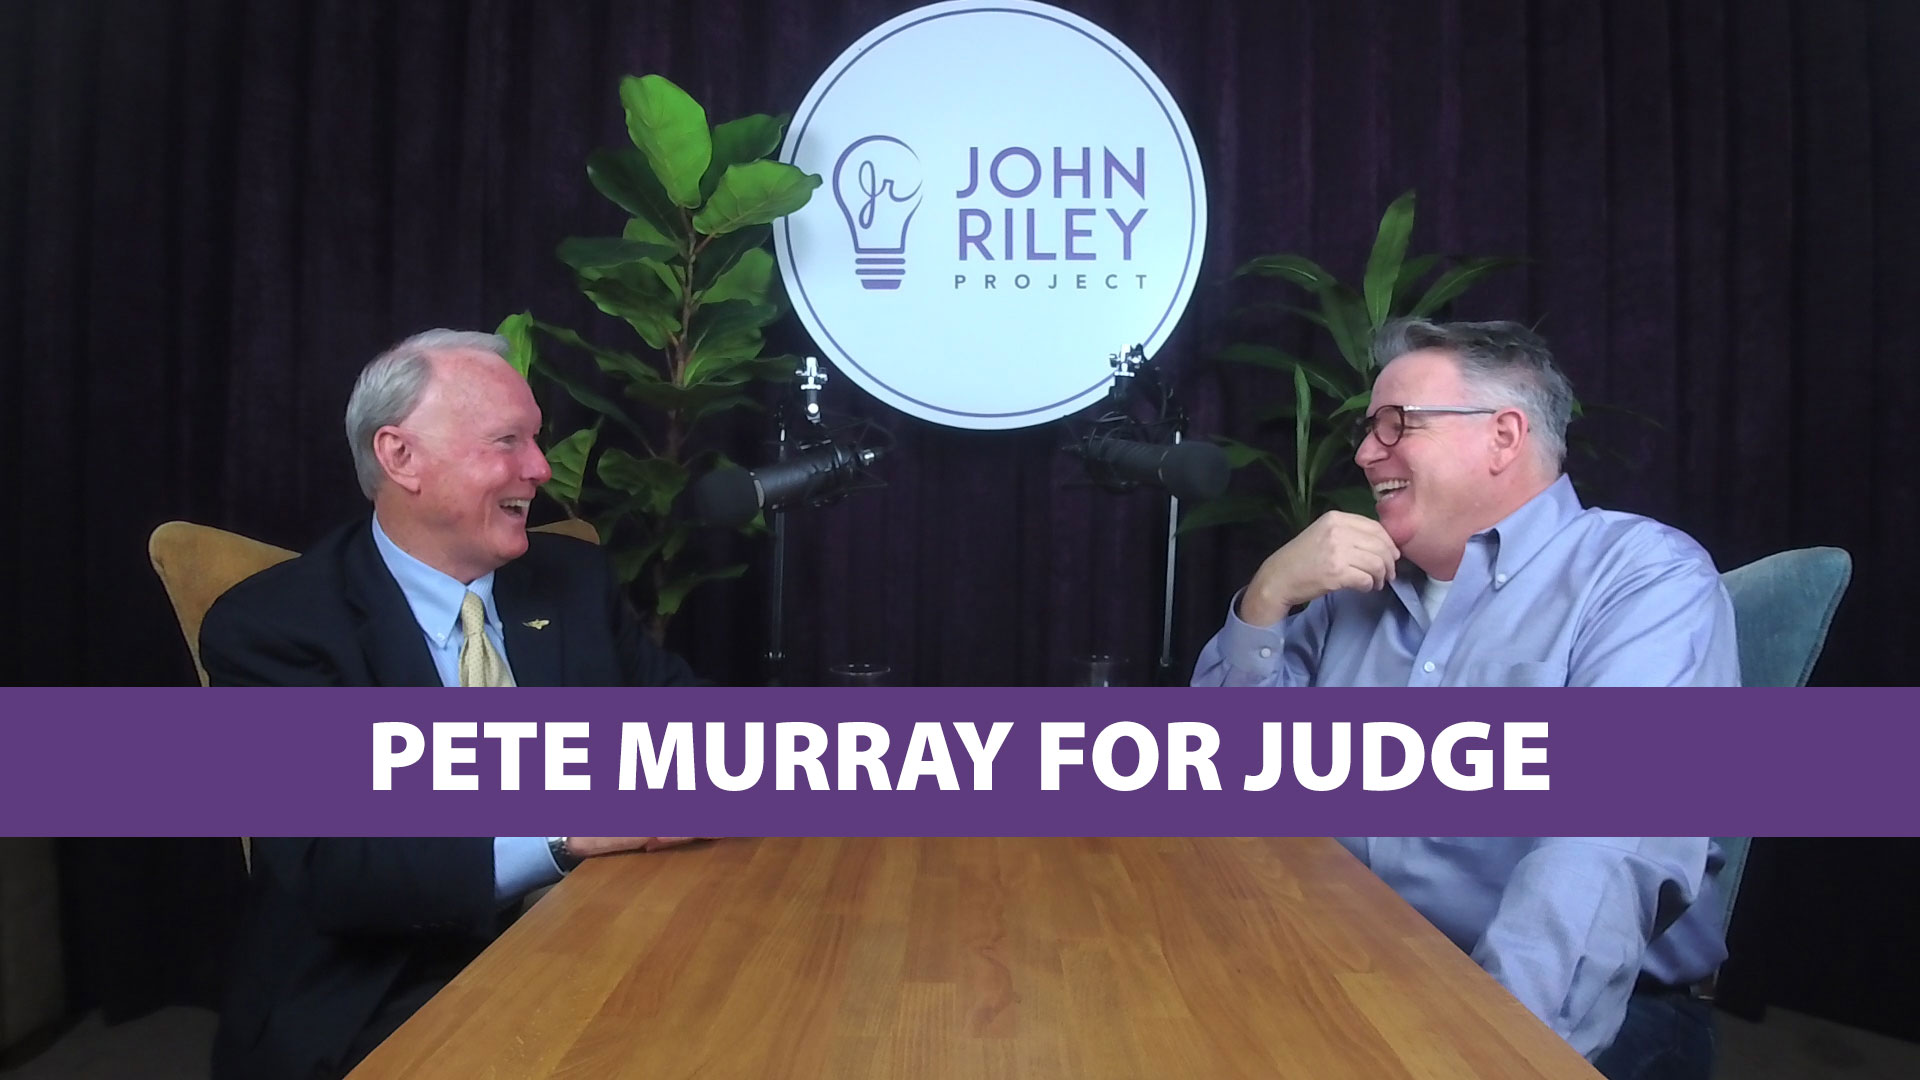 Pete Murray for Judge, John Riley Project, JRP0105